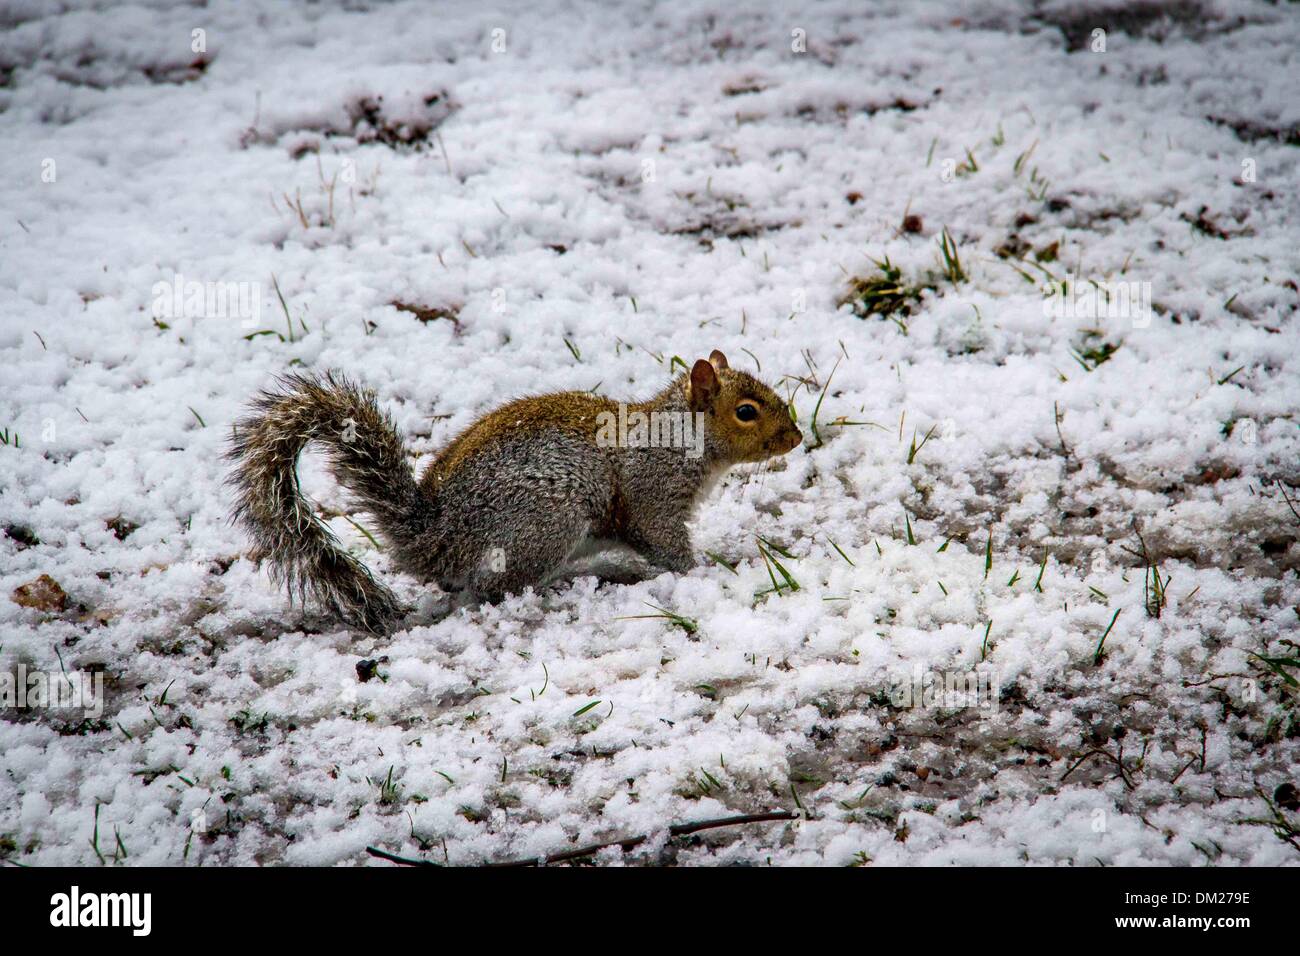 New York, USA. 10th Dec, 2013. A squirrel looks for something to eat during a snowfall in Central Park, New York City, United States, on Dec. 10, 2013. Credit:  Niu Xiaolei/Xinhua/Alamy Live News Stock Photo